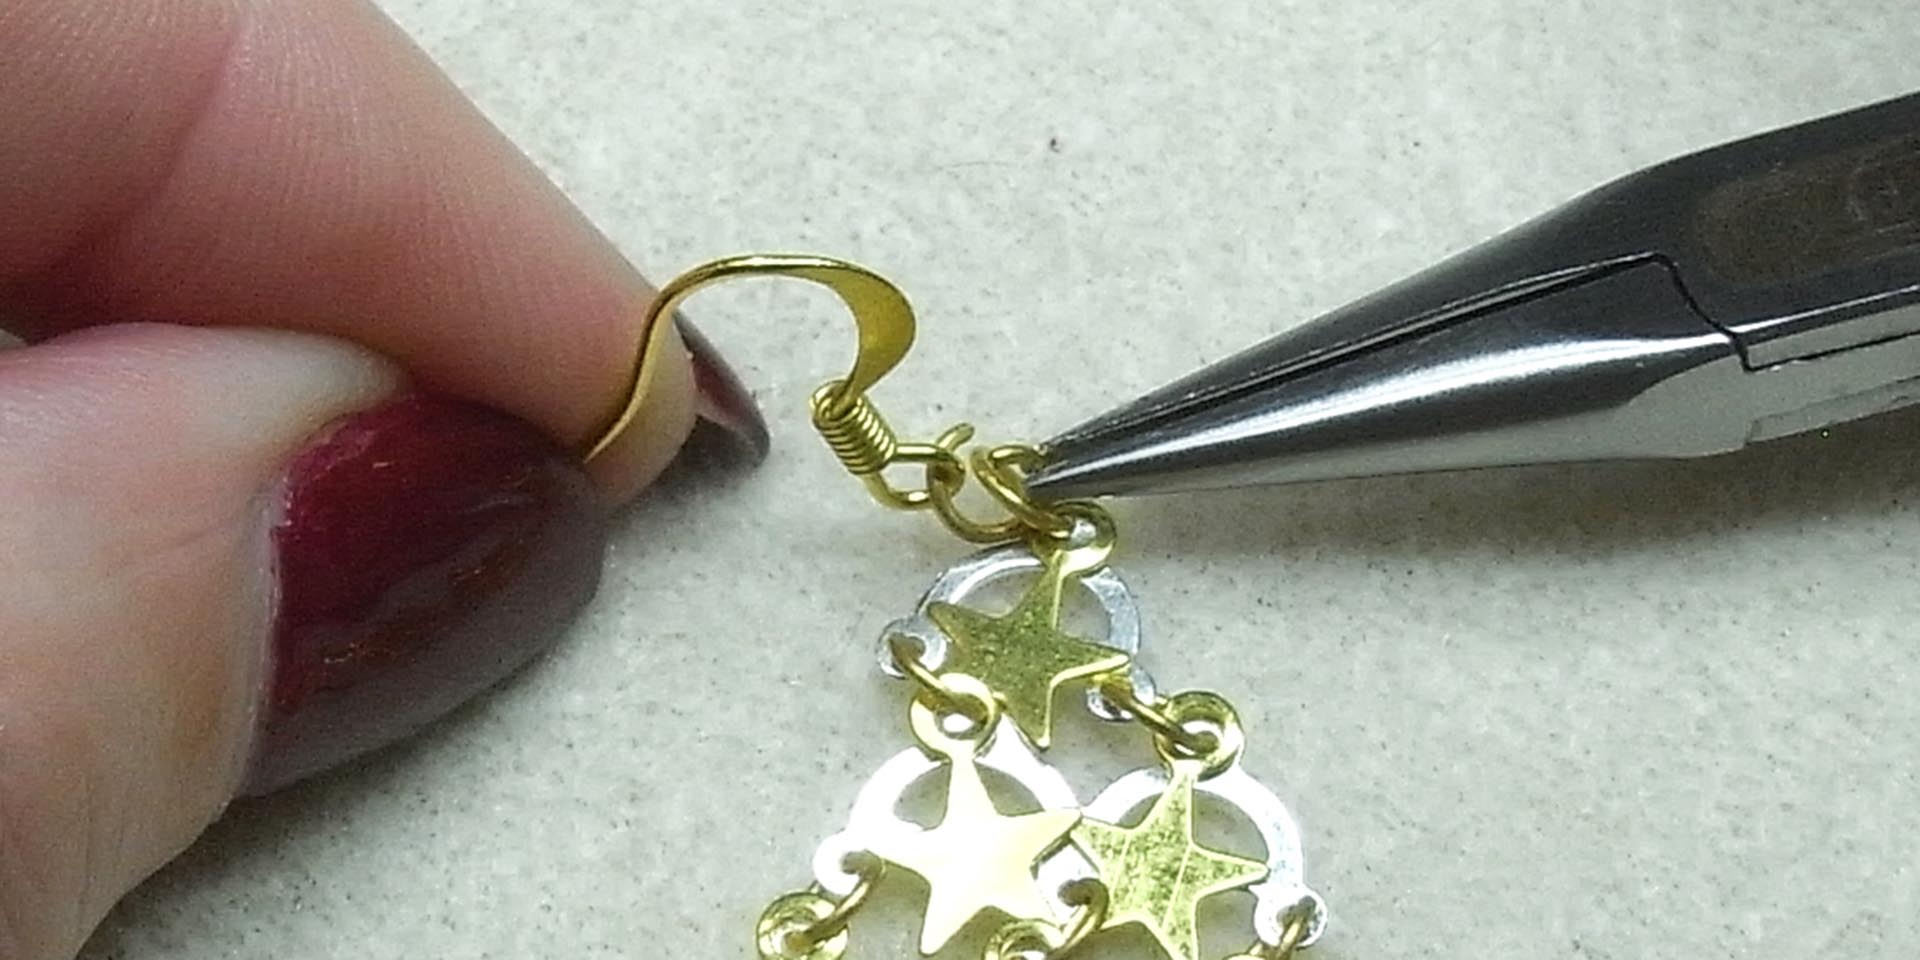 Attach an earring wire to the stars with a jump ring